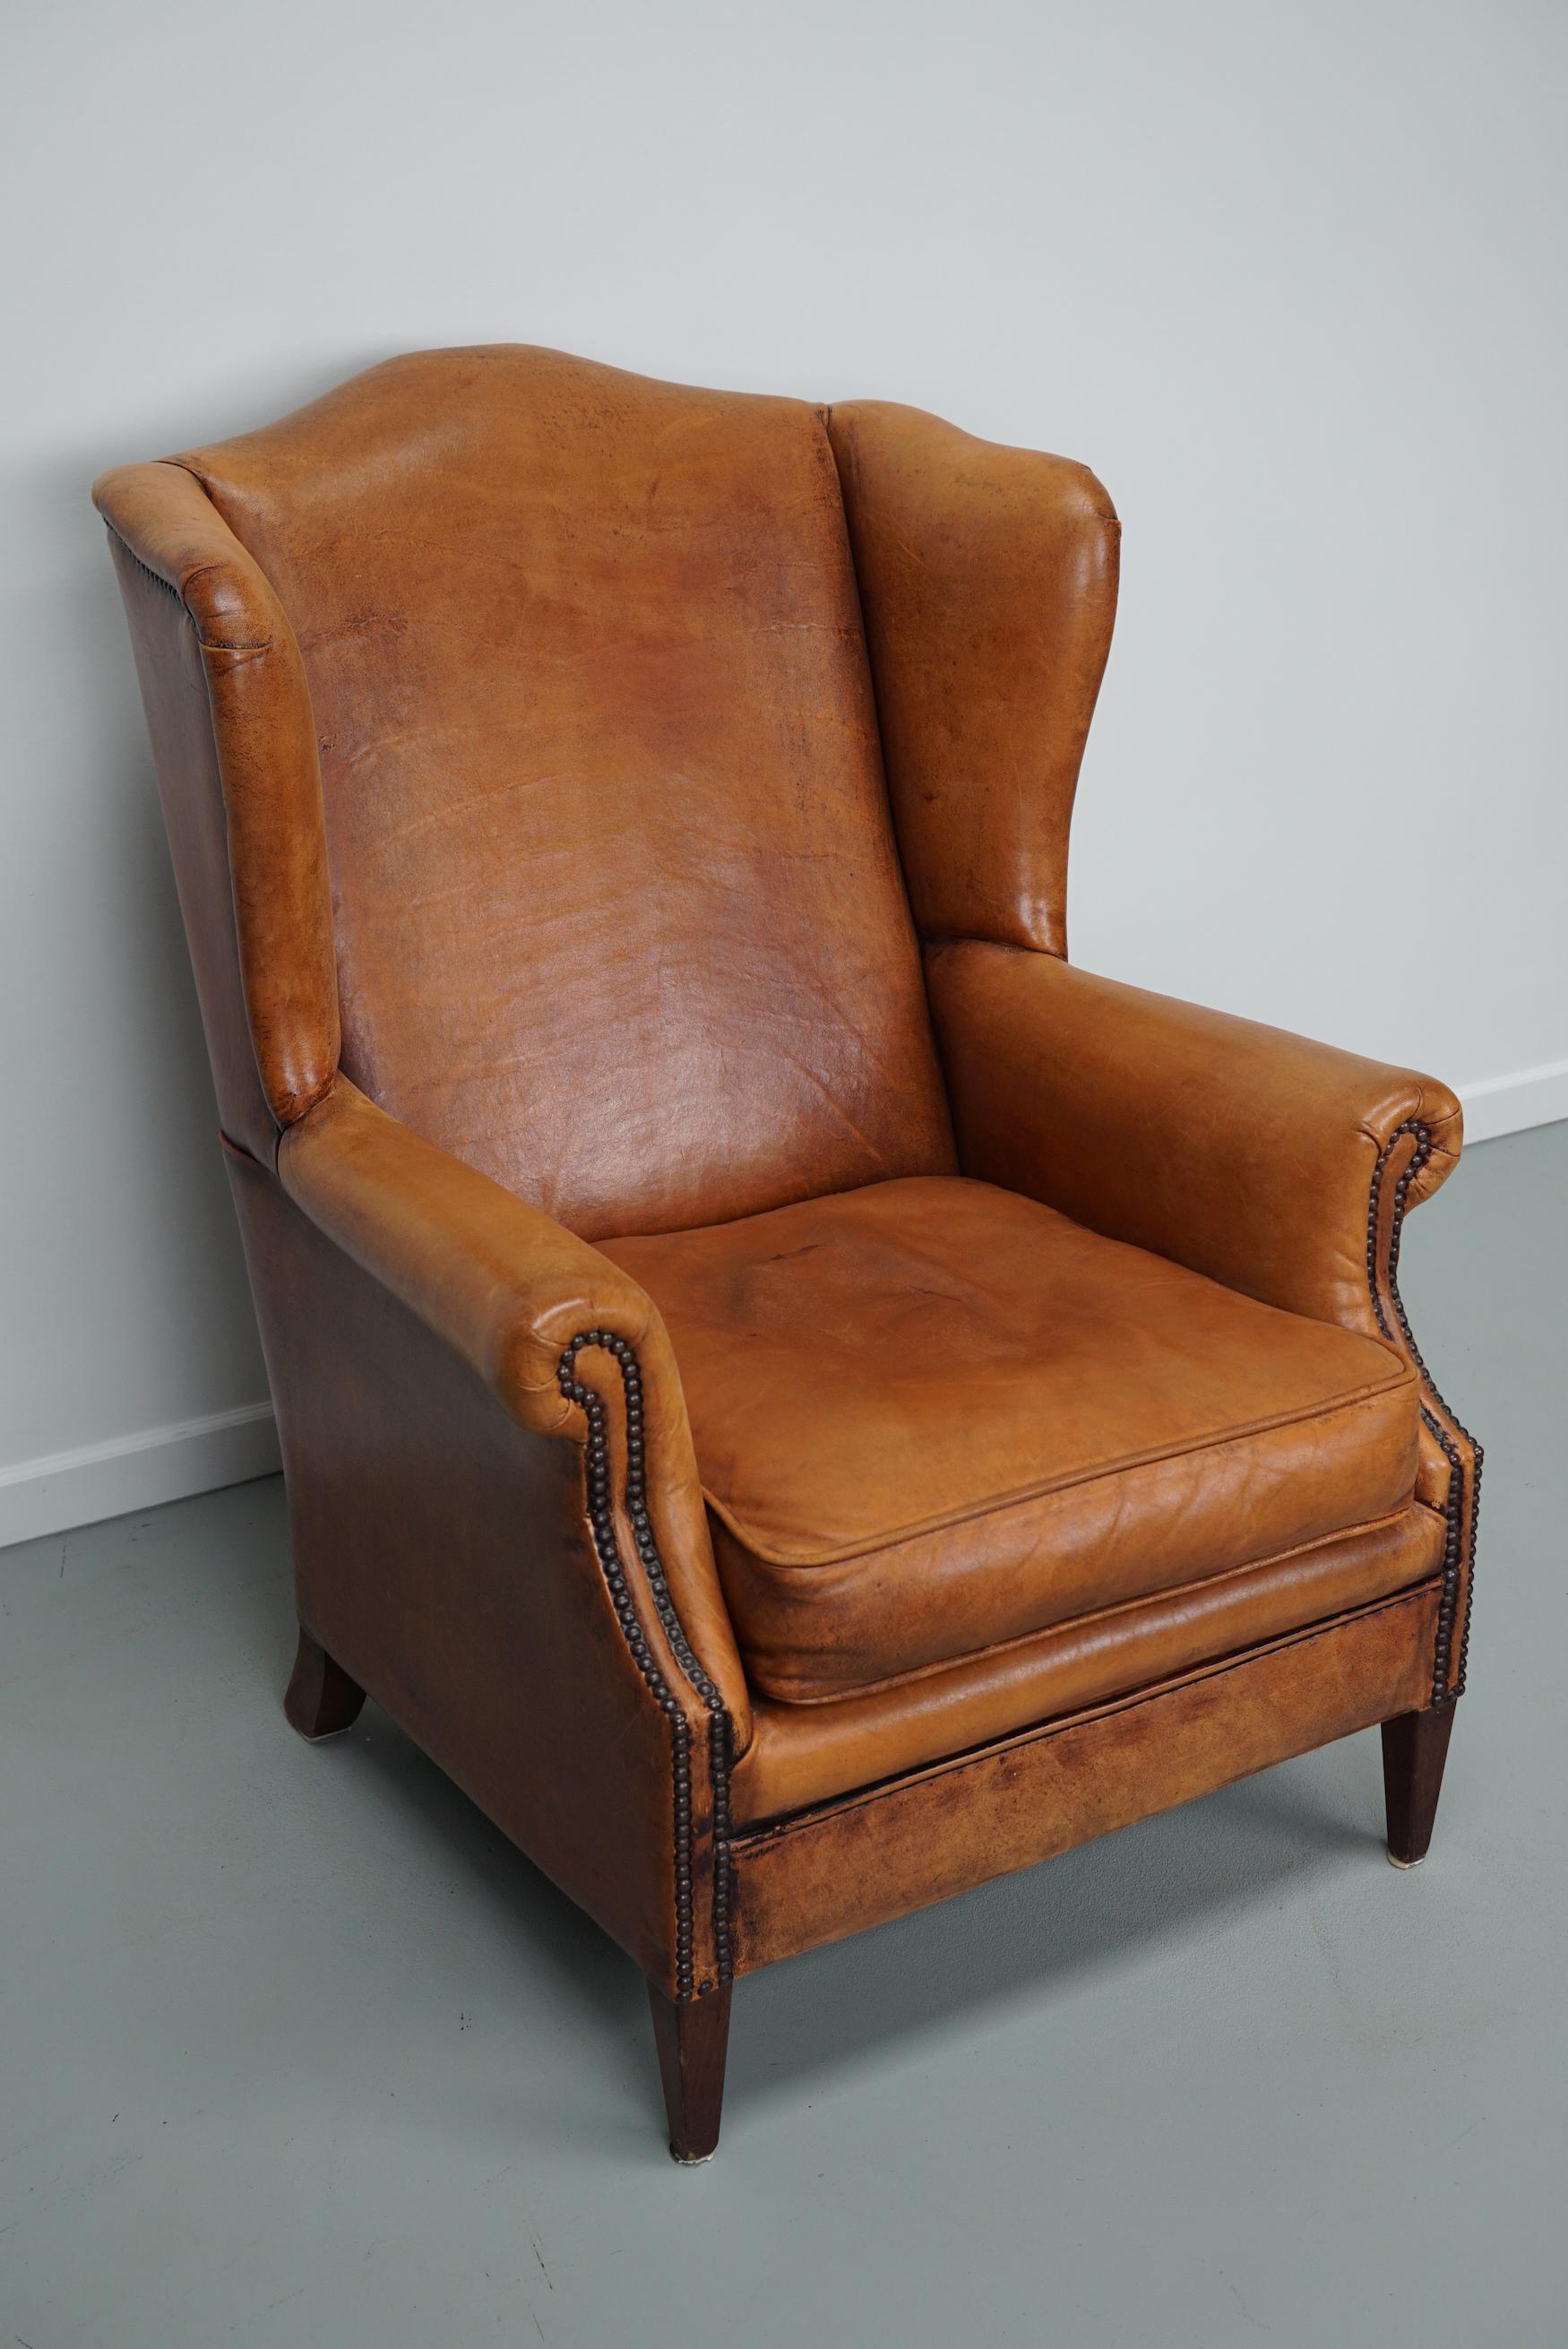 Industrial  Vintage Dutch Cognac Colored Wingback Leather Club Chair